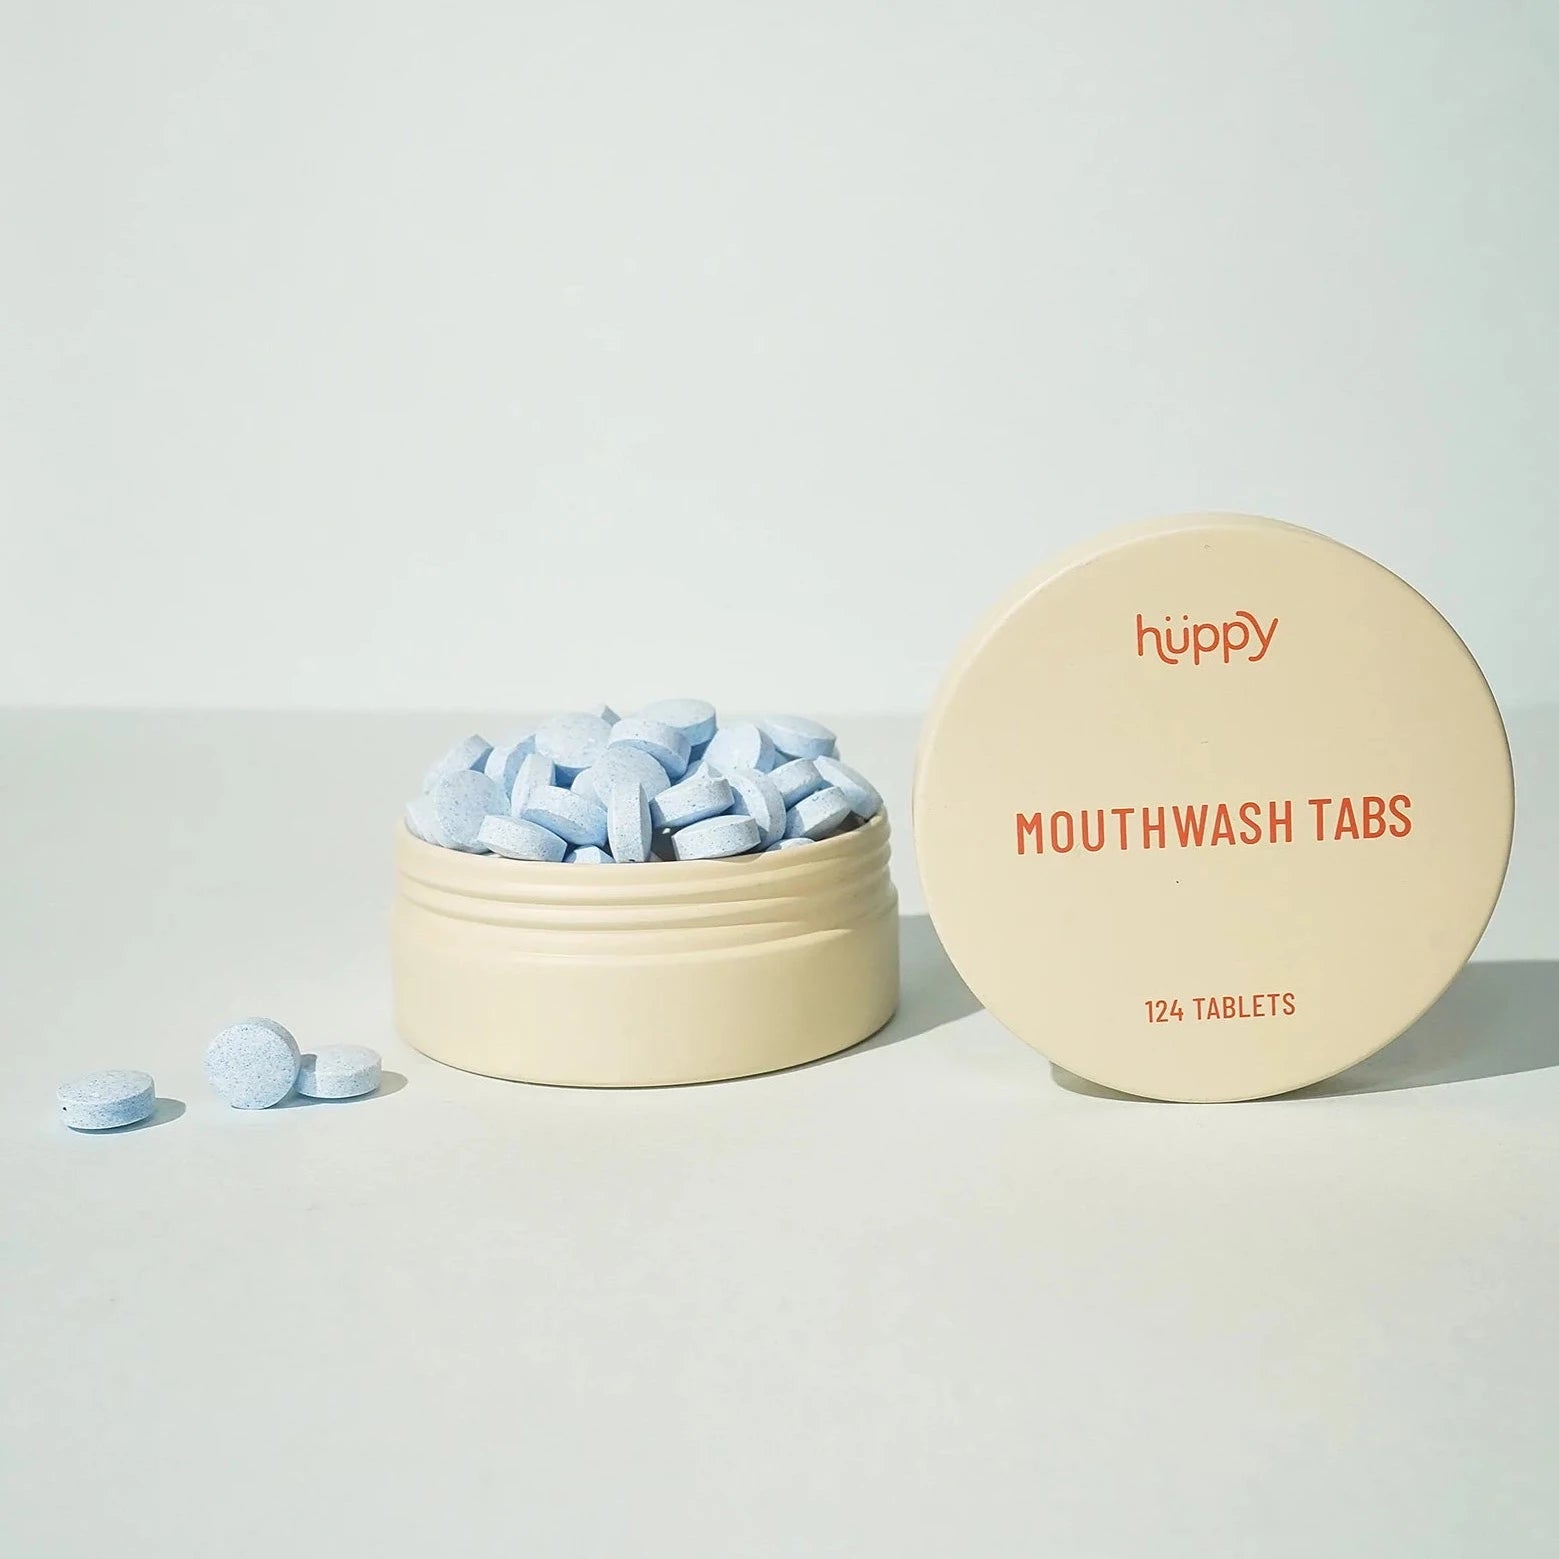 Huppy Cool Mint Mouthwash Tablets